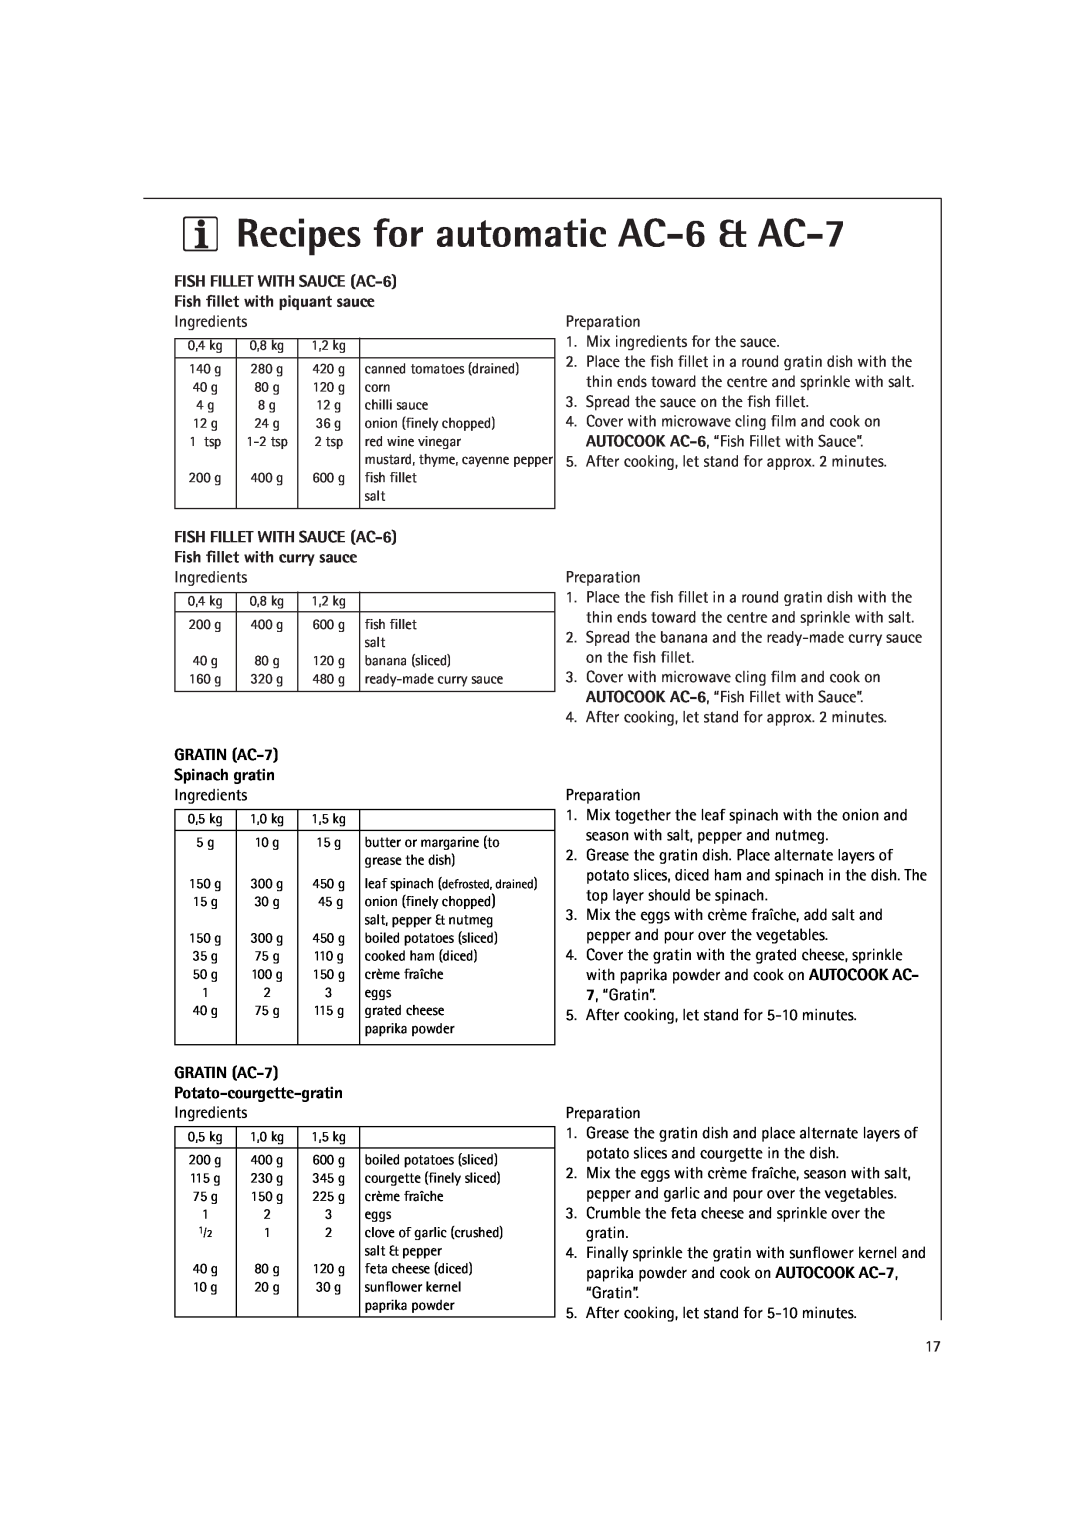 AEG MC1751E, MC1761E Recipes for automatic AC-6& AC-7, FISH FILLET WITH SAUCE AC-6, Fish fillet with piquant sauce 